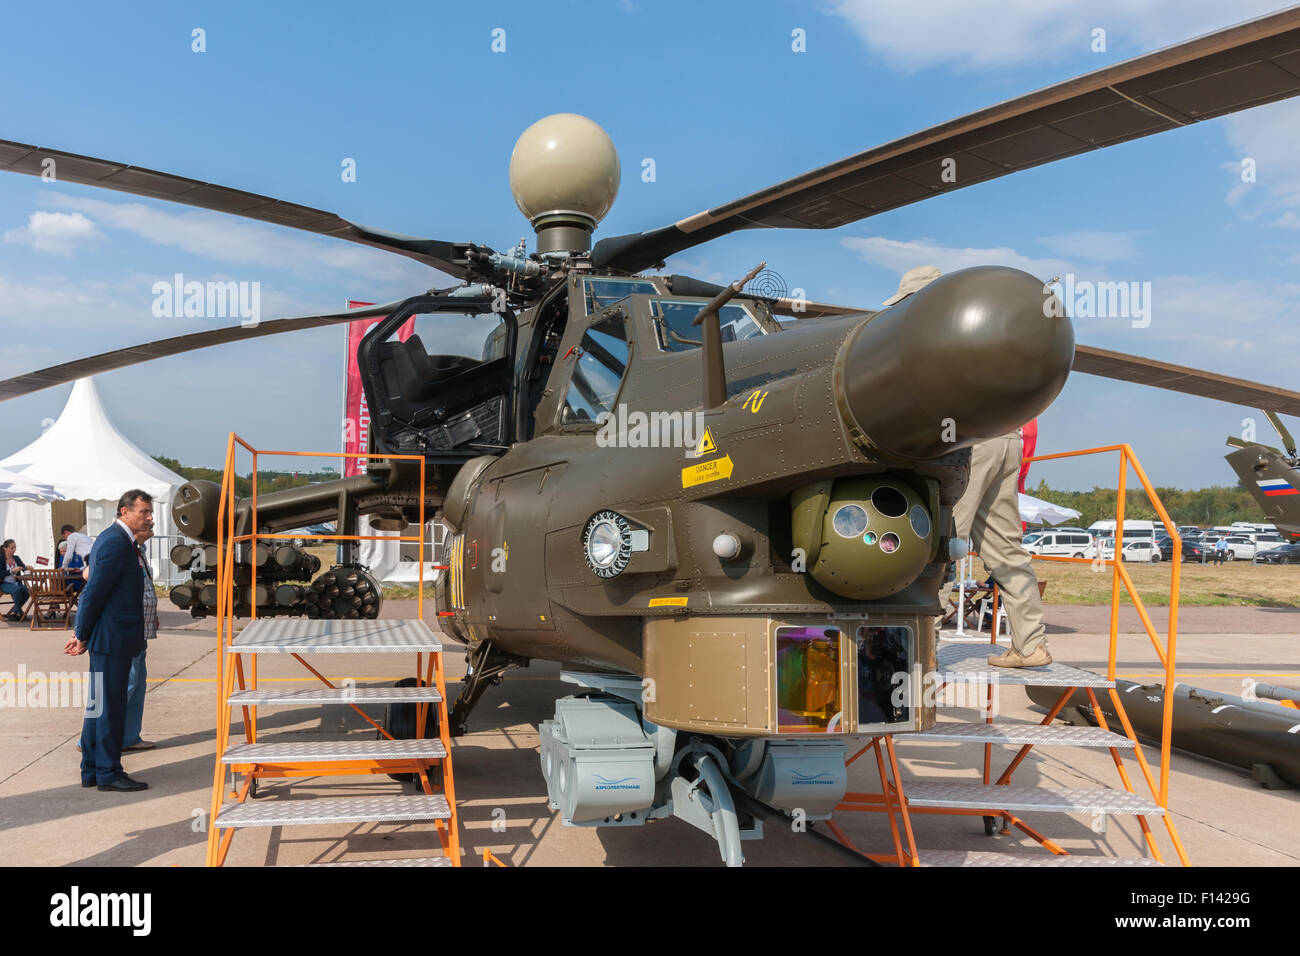 Moscow, Russia, Wednesday, August 26, 2015. The Twelfth International Moscow Aerospace Show MAKS 2015 was opened in Zhukovsky city in the Moscow Region on August 25, 2015. The aim of the show is to demonstrate Russian aerospace achievements, make contracts and negotiate international projects. Mil Mi-28 (Havoc) all-weather, day-night, military, tandem, two-seat anti-armor attack helicopter on display at the air show. Credit:  Alex's Pictures/Alamy Live News Stock Photo